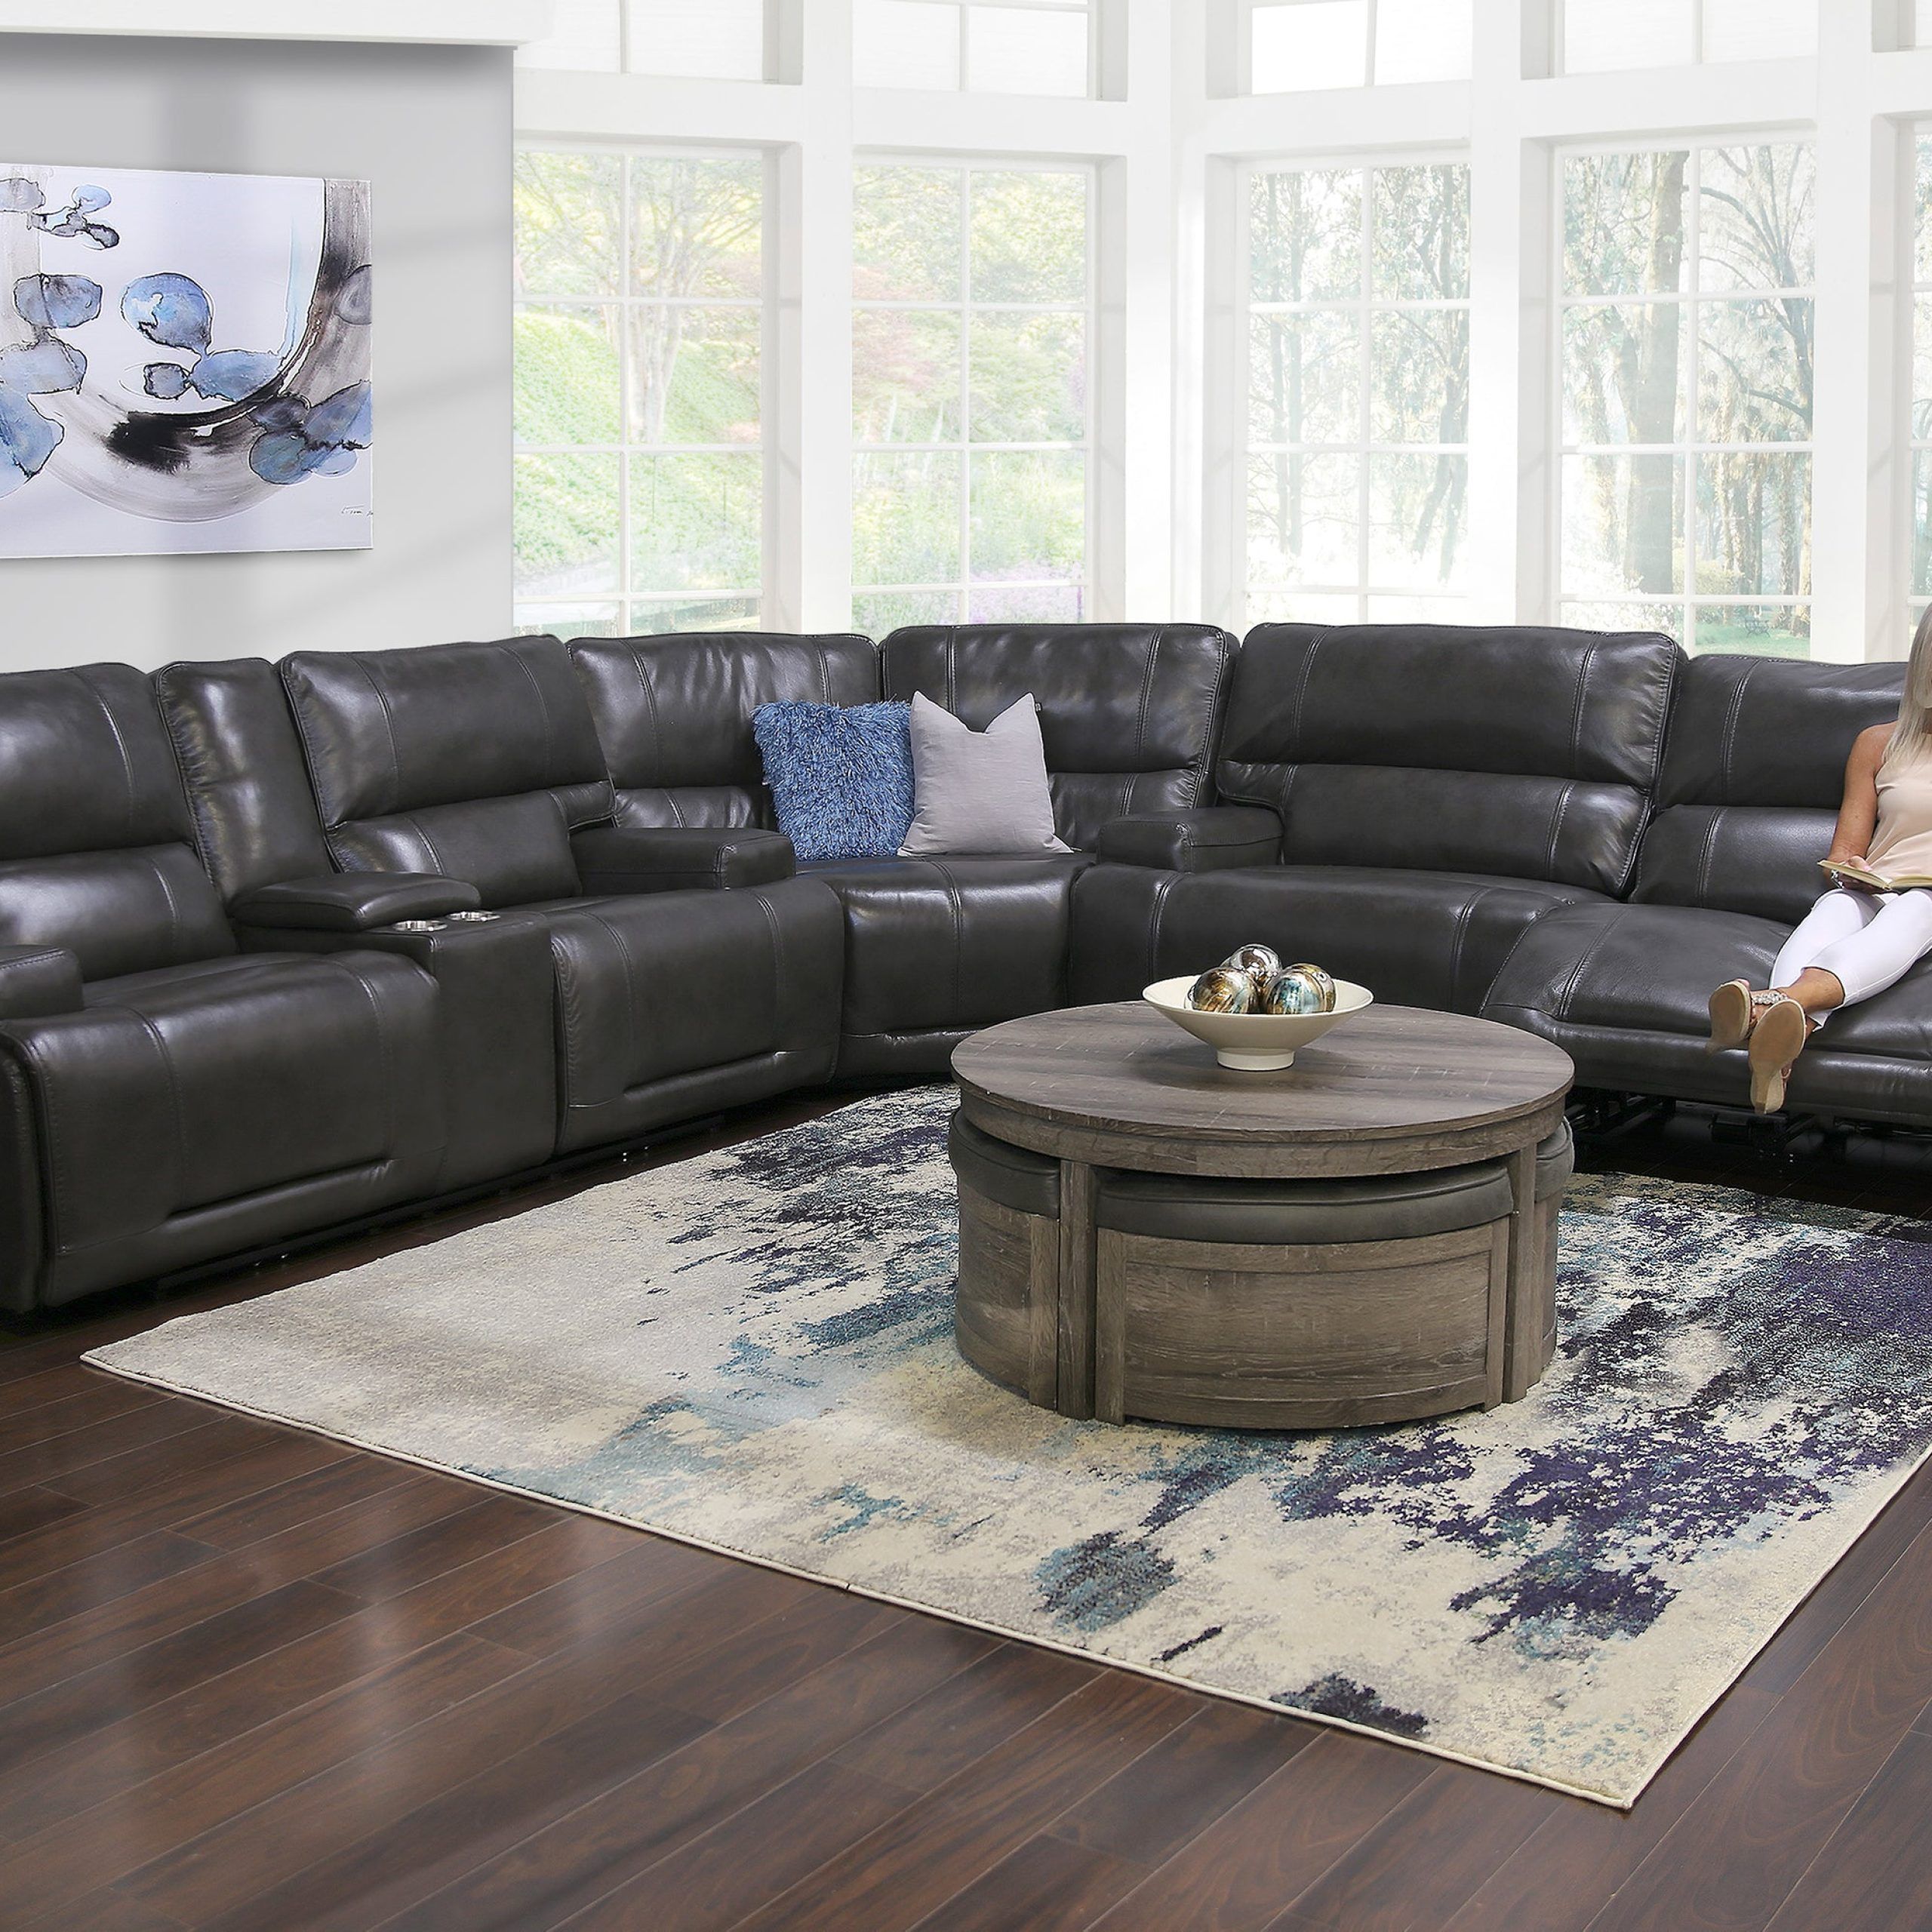 Popular 3 Piece Leather Sectional Sofa Sets Inside Nova 3 Piece Leather Triple Power Reclining Sectional Sofa (View 6 of 15)